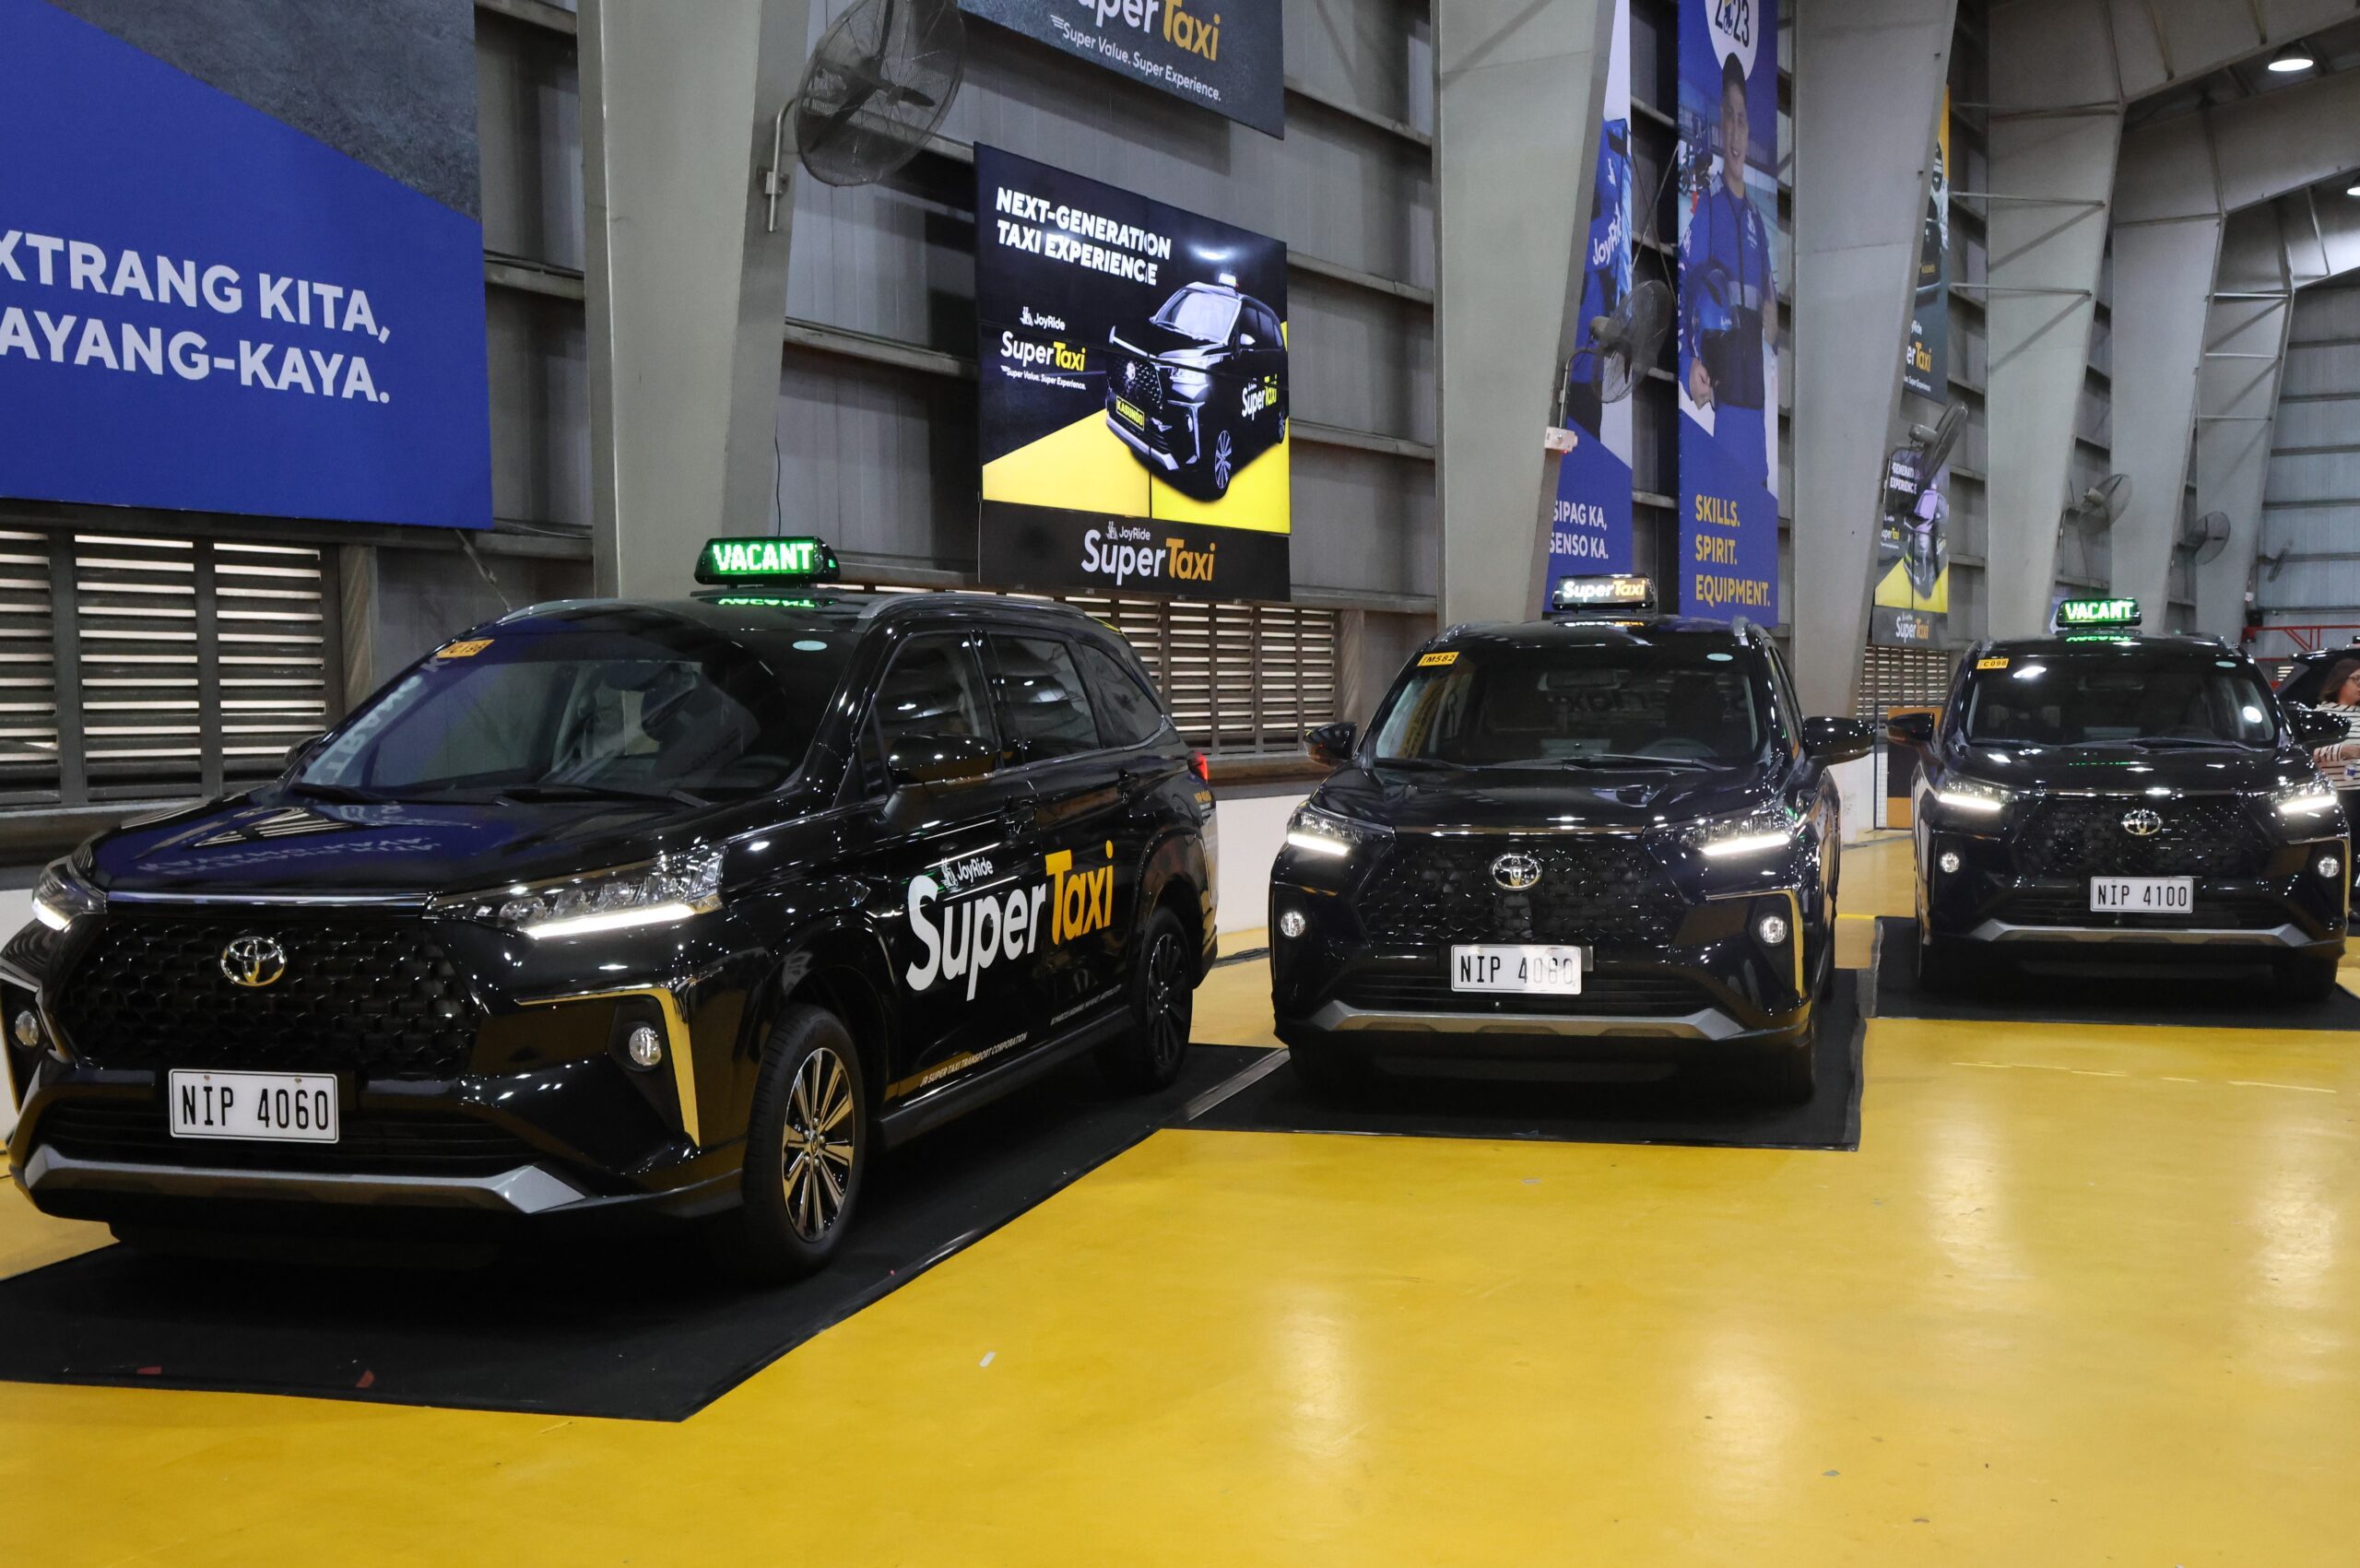 ‘Super Taxi’: JoyRide launches its own taxi service